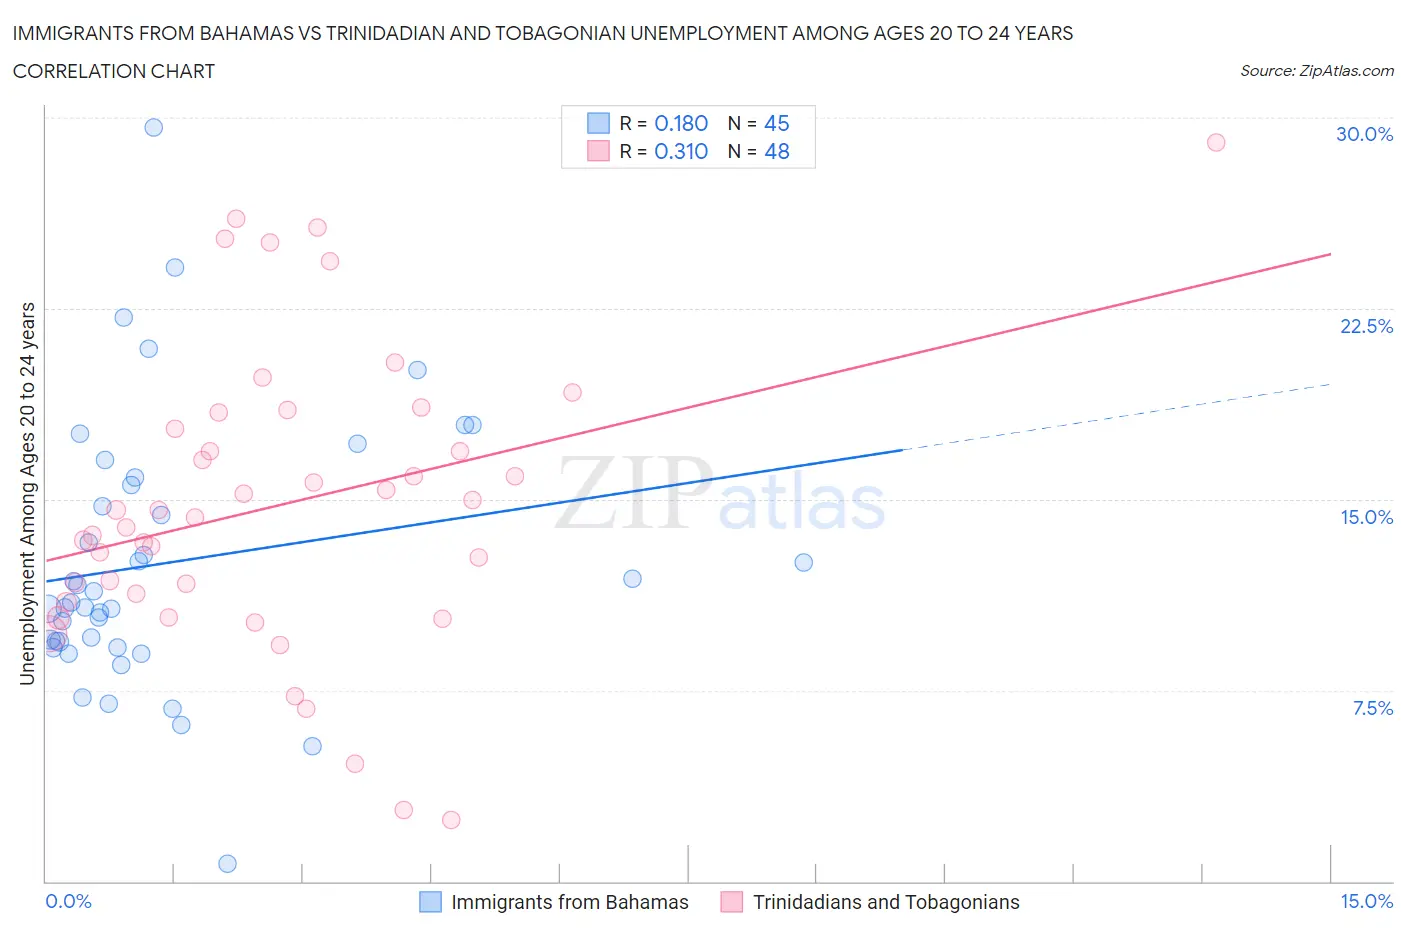 Immigrants from Bahamas vs Trinidadian and Tobagonian Unemployment Among Ages 20 to 24 years